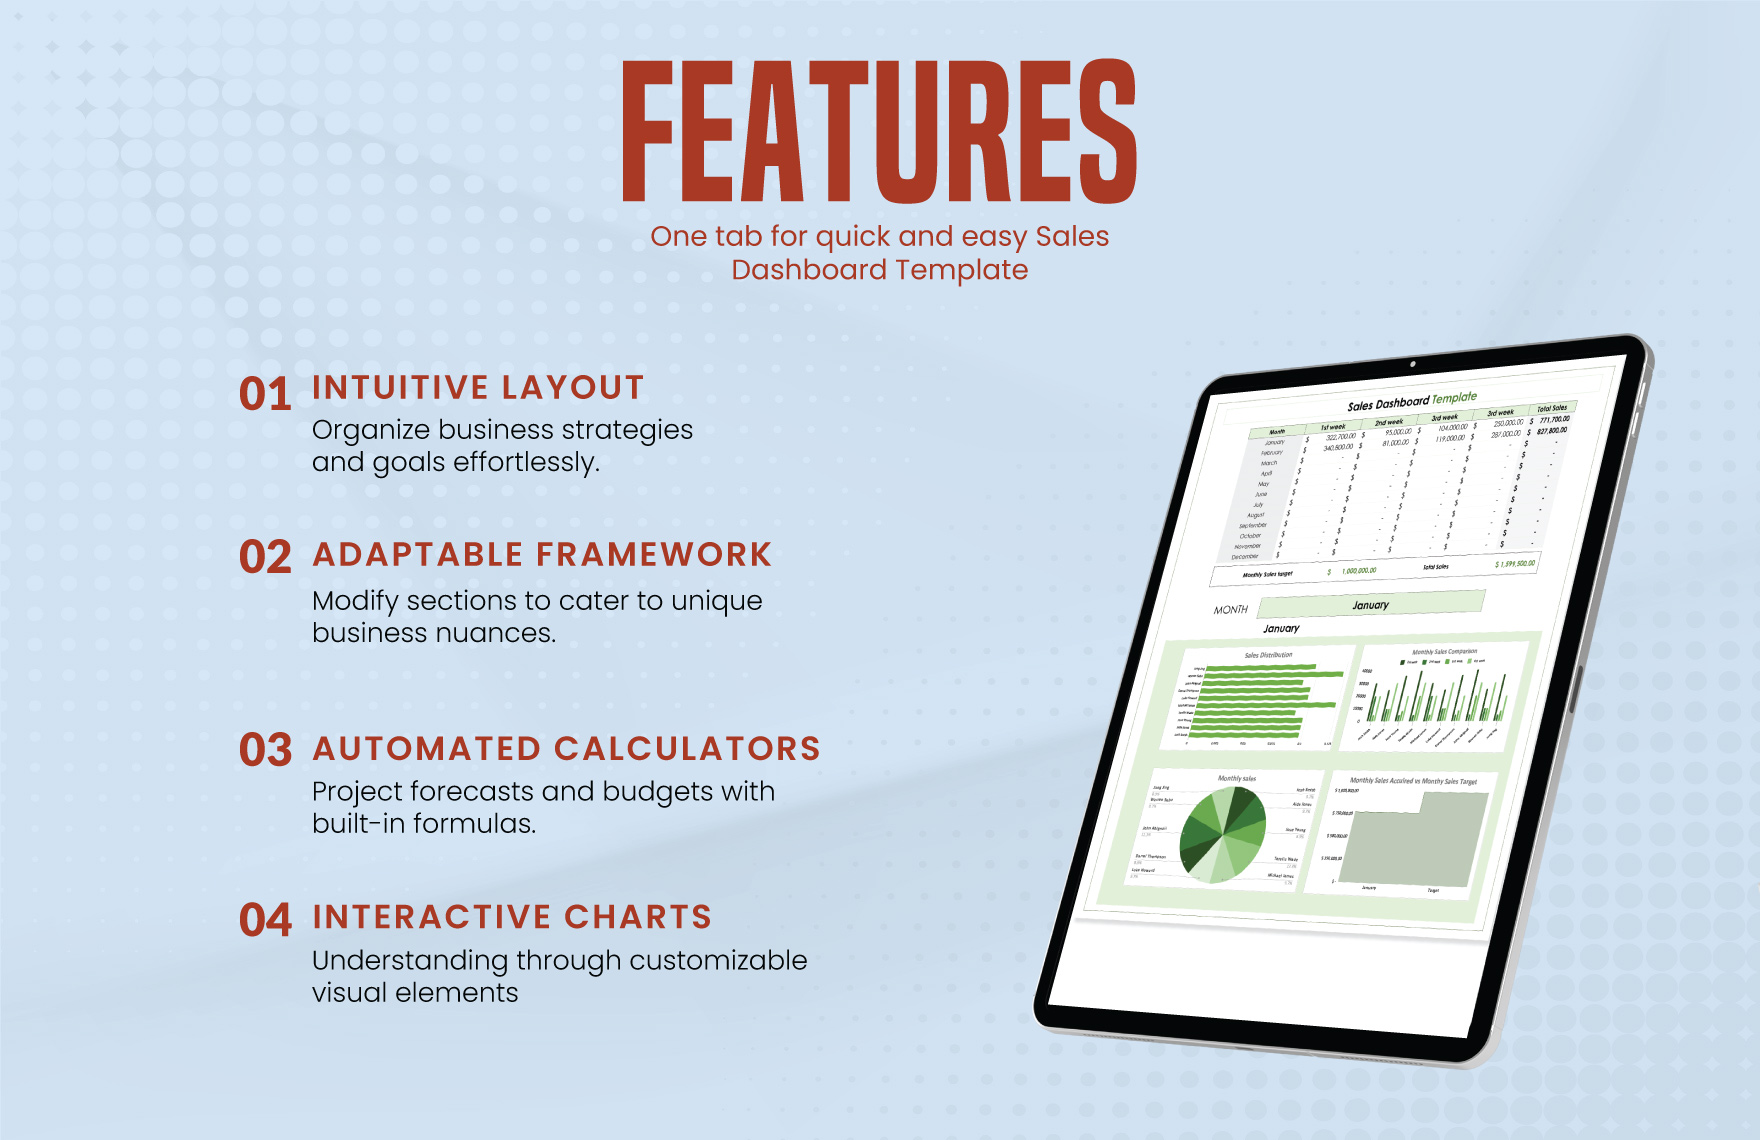 Sales Dashboard Template